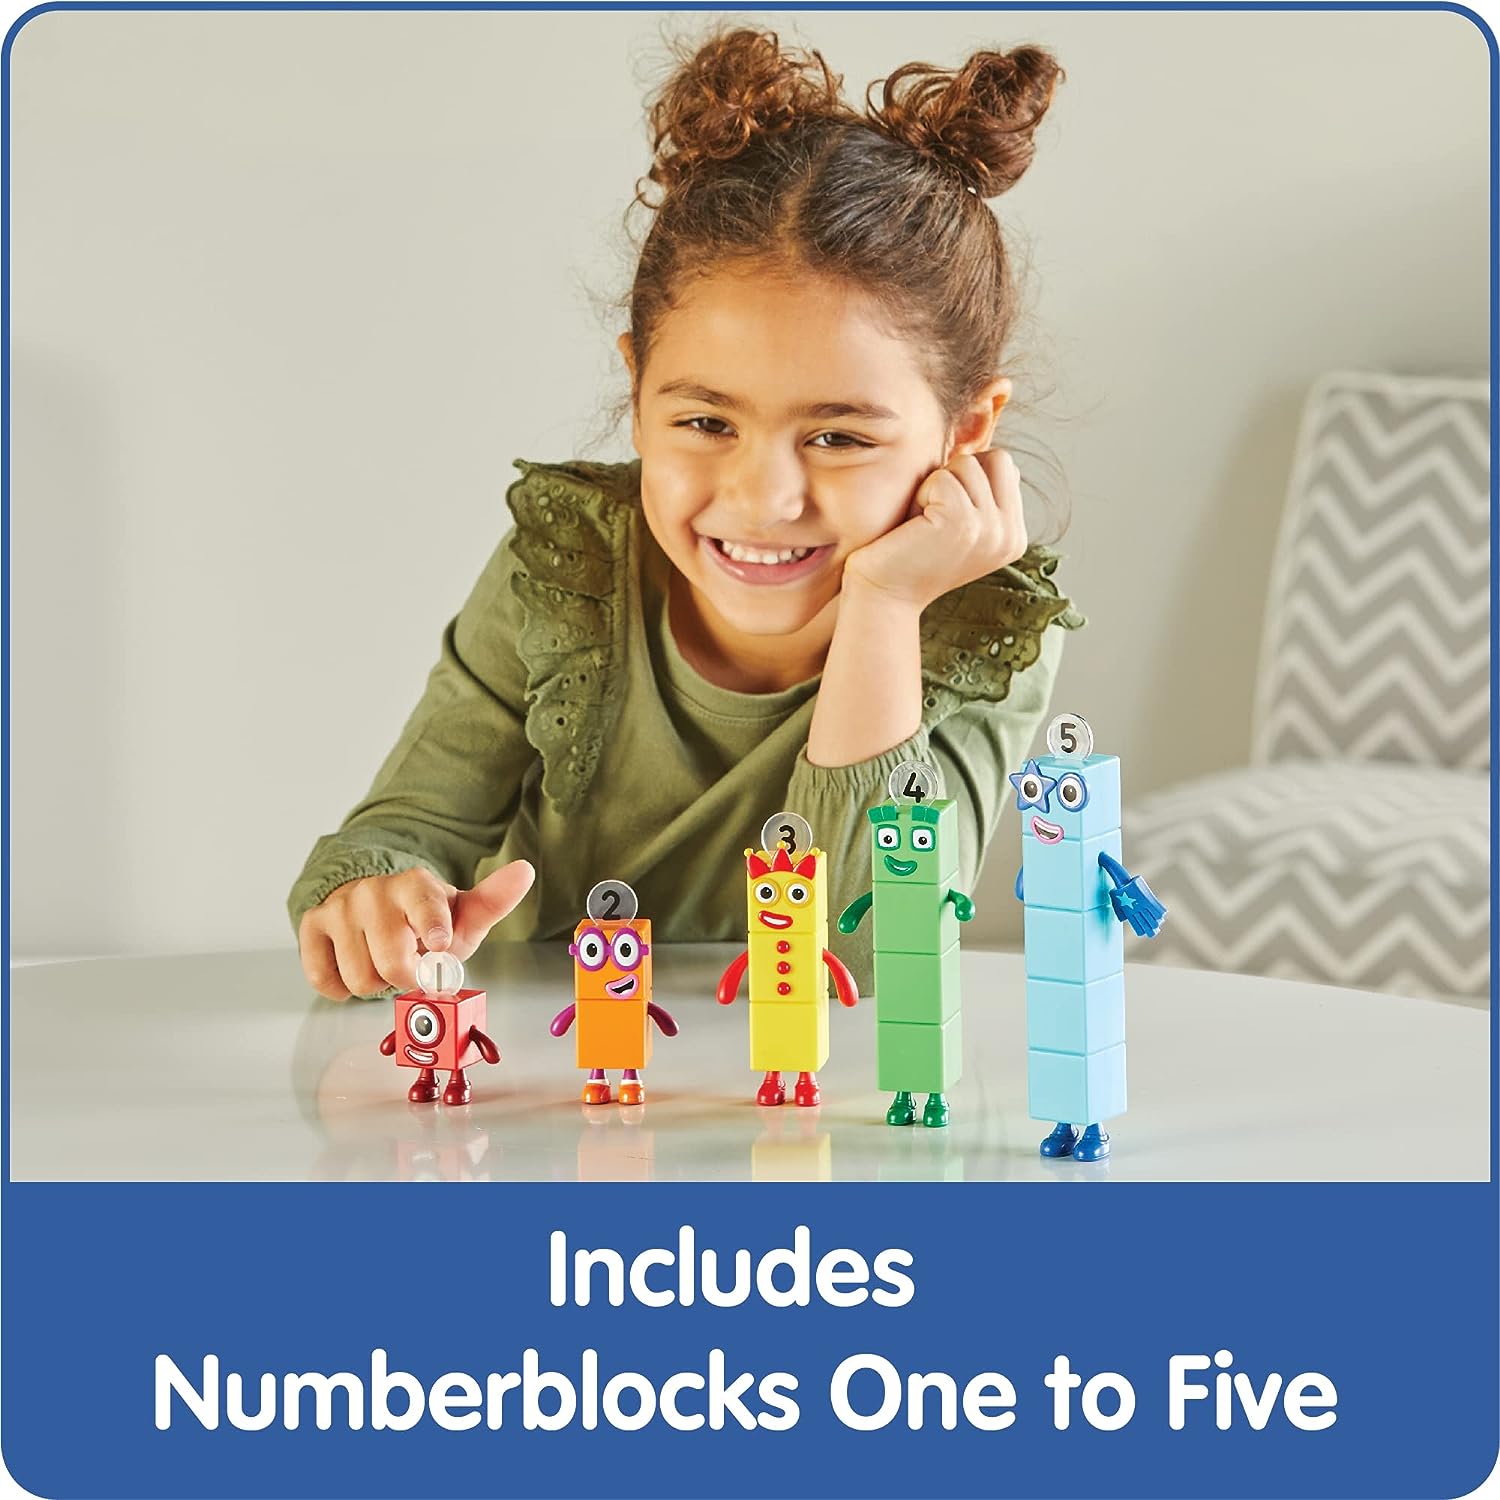 hand2mind Numberblocks Friends One to Five Figures, Toy Figures Collectibles, Small Cartoon Figurines for Kids, Mini Action Figures, Character Figures, Play Figure Playsets, Imaginative Play Toys